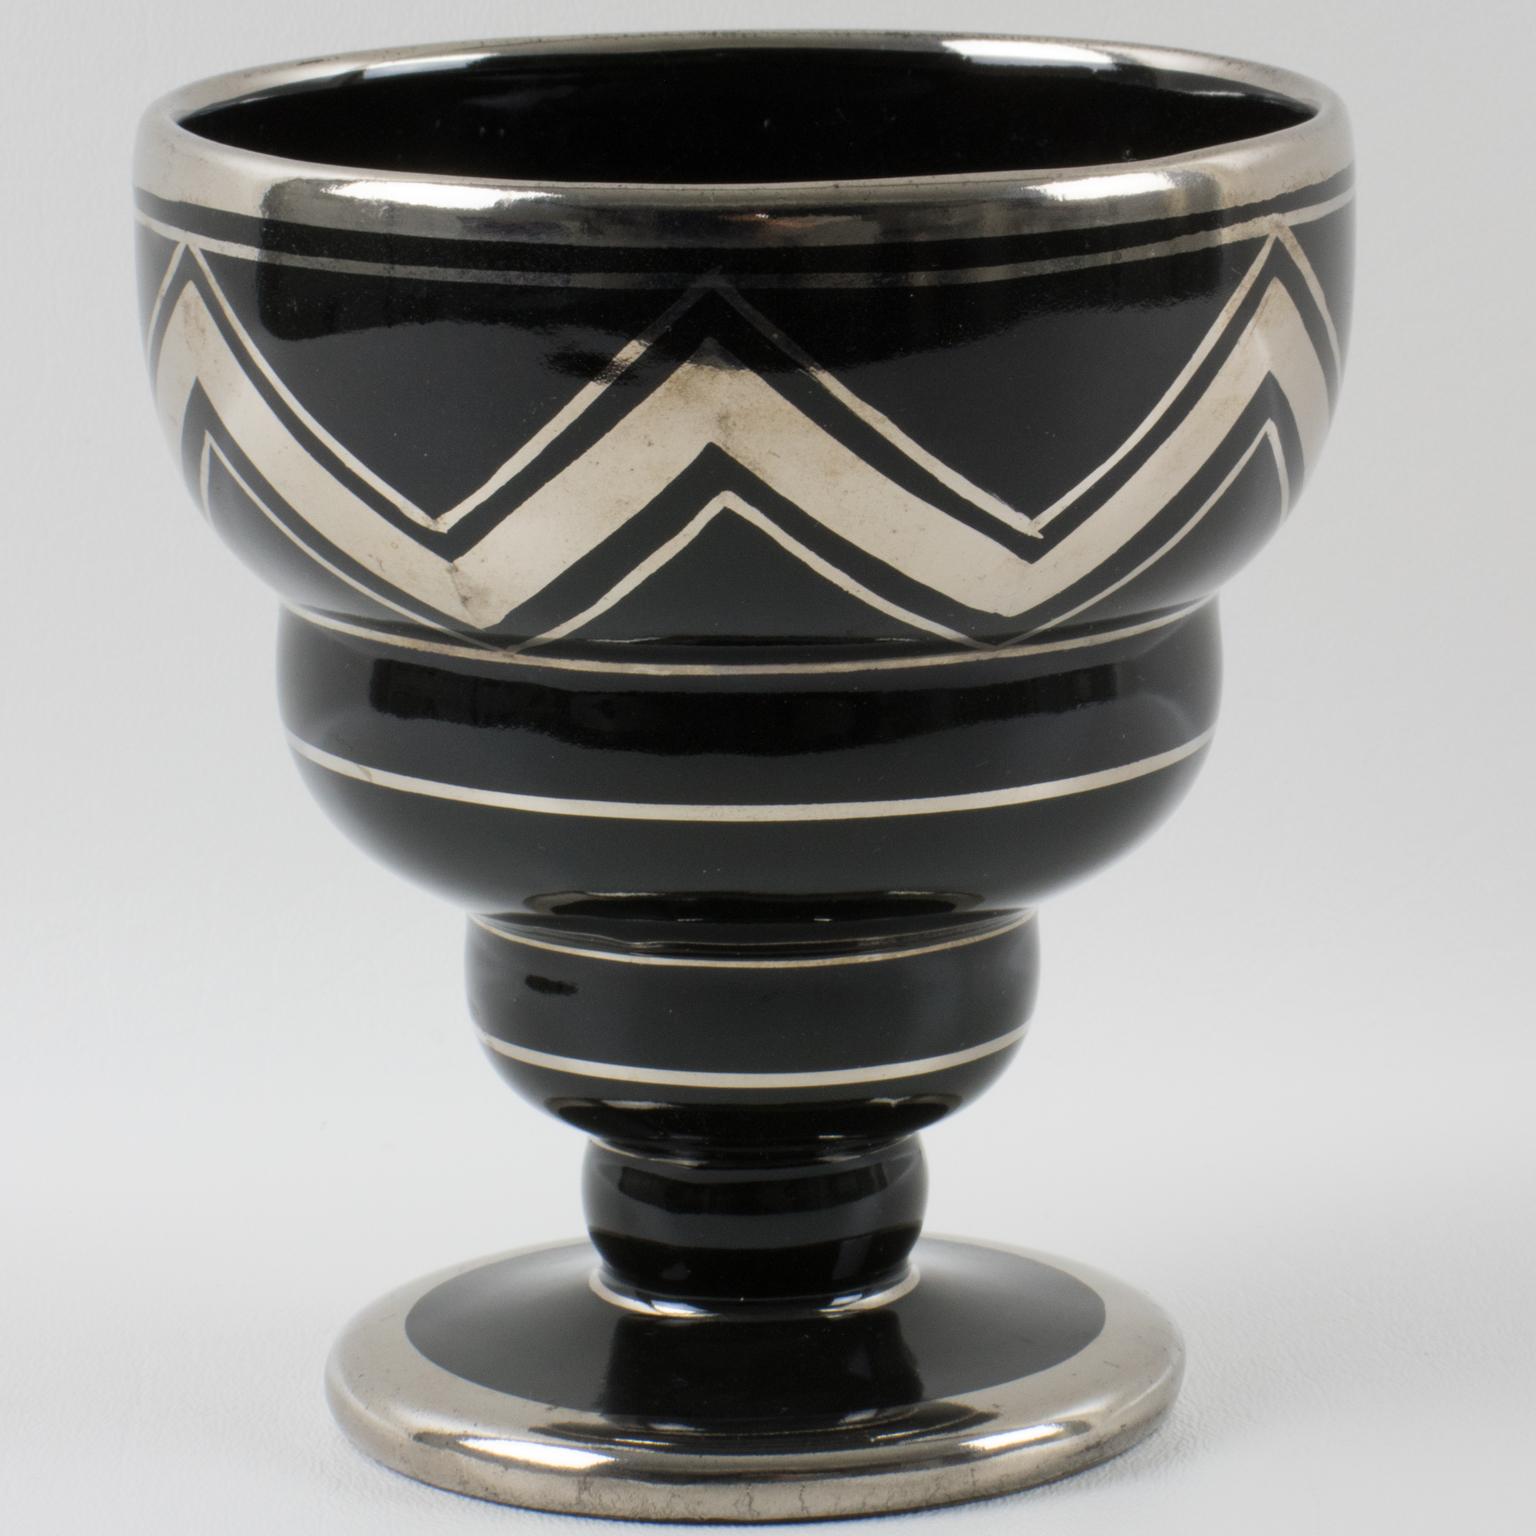 Mid-20th Century Art Deco Silver Overlay and Black Ceramic Vase by Ceram France, 1930s For Sale